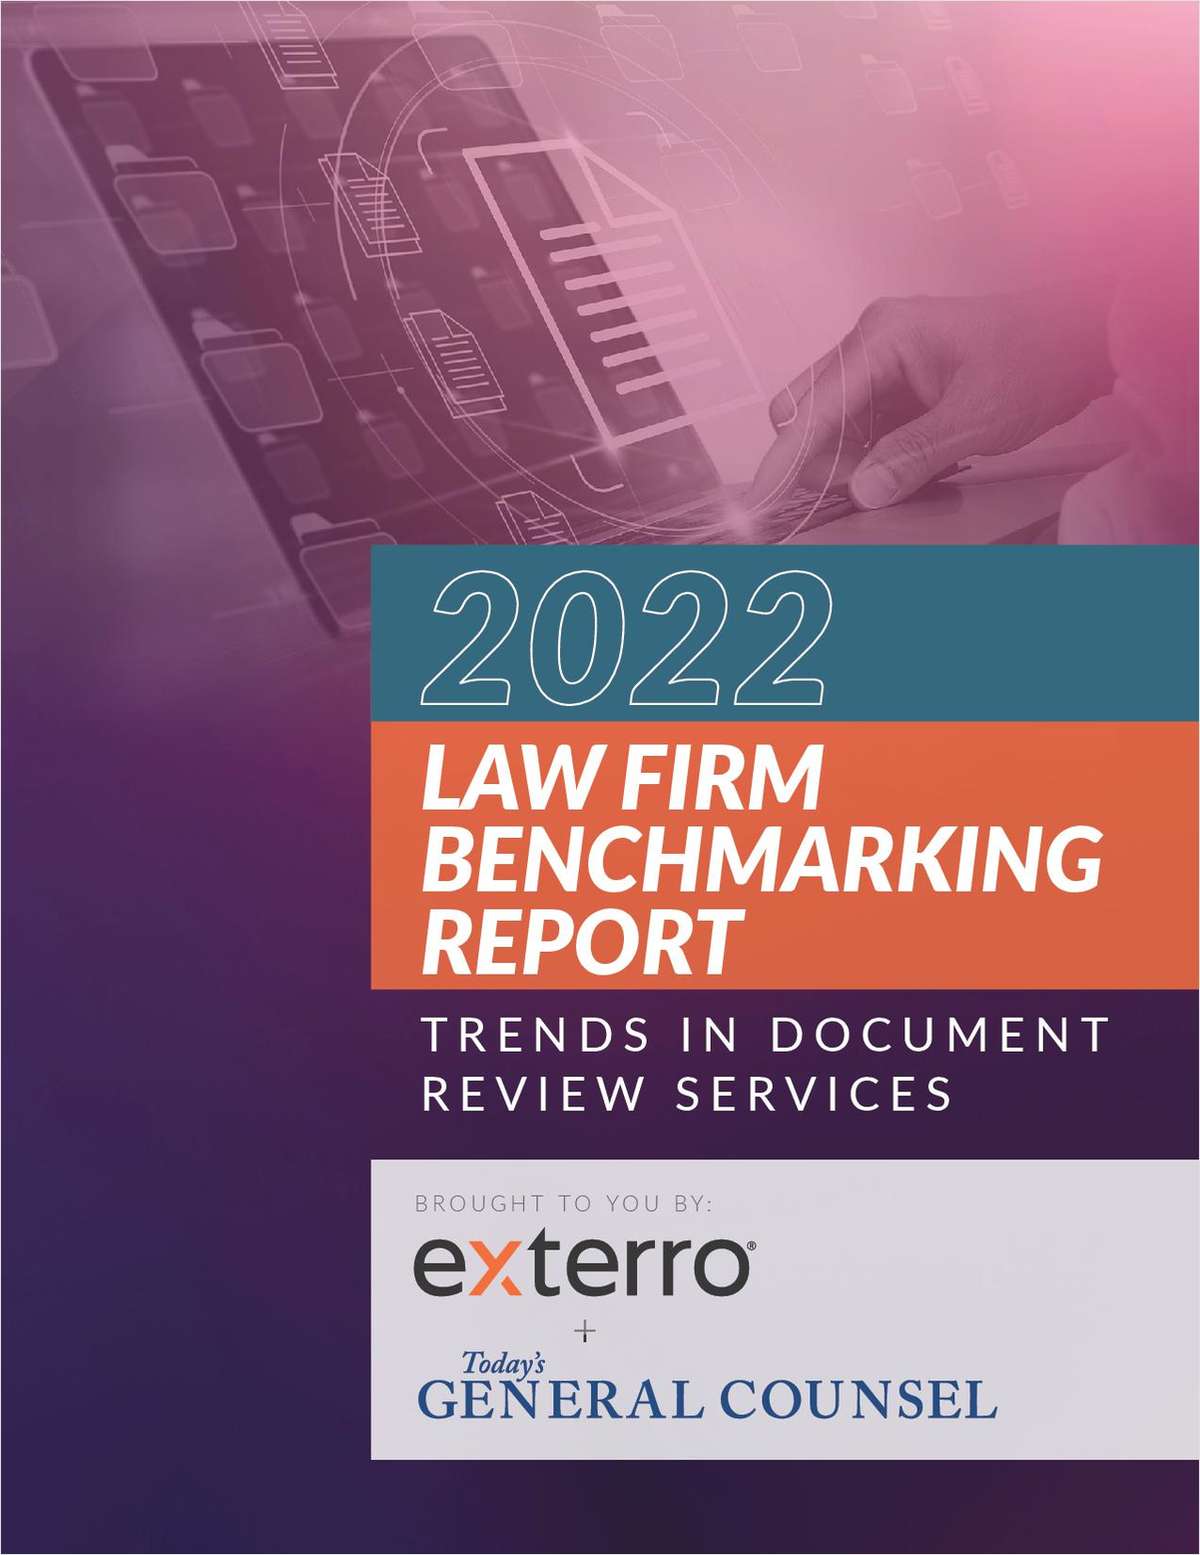 2022 Law Firm Benchmarking Report: Trends in Document Review Services